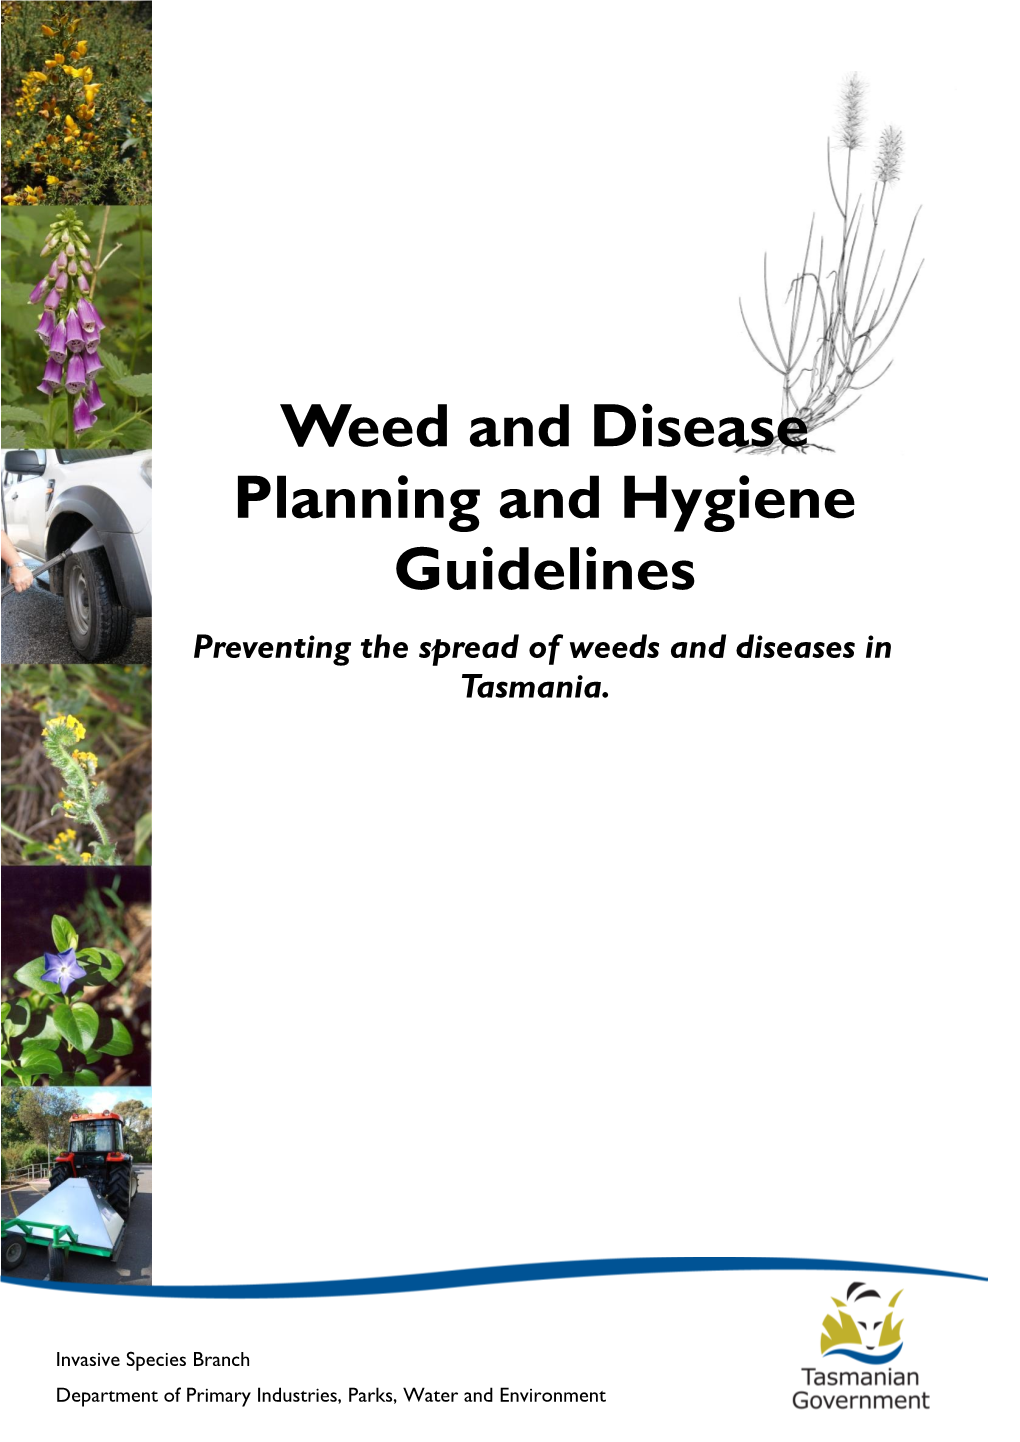 Weed and Disease Planning and Hygiene Guidelines - Preventing the Spread of Weeds and Diseases in Tasmania